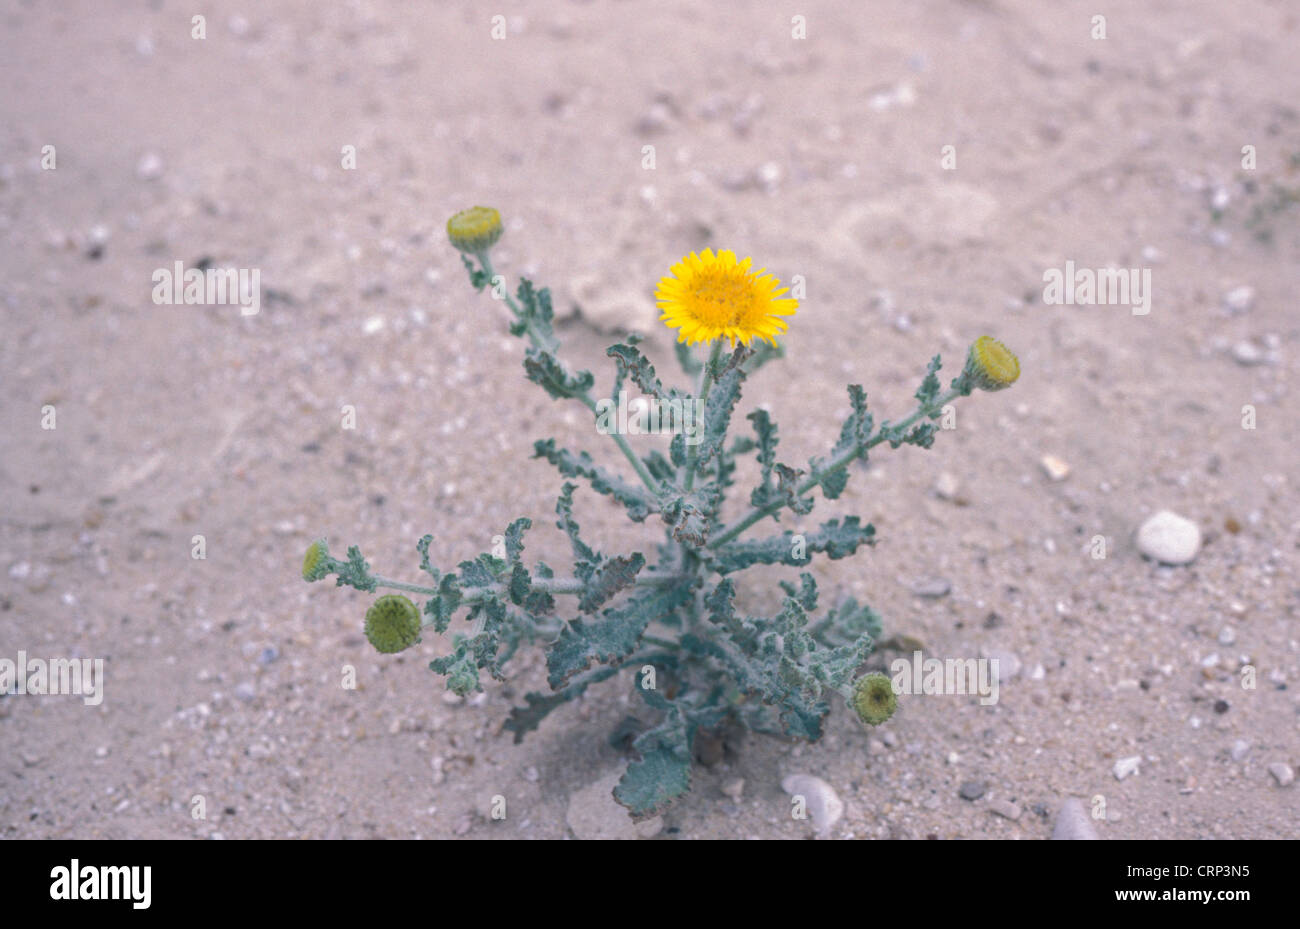 Parosheet Galonit (Pulicaria desertorum) is a low-lying plant with yellow flowers that grows in desert areas. The leaves and Stock Photo